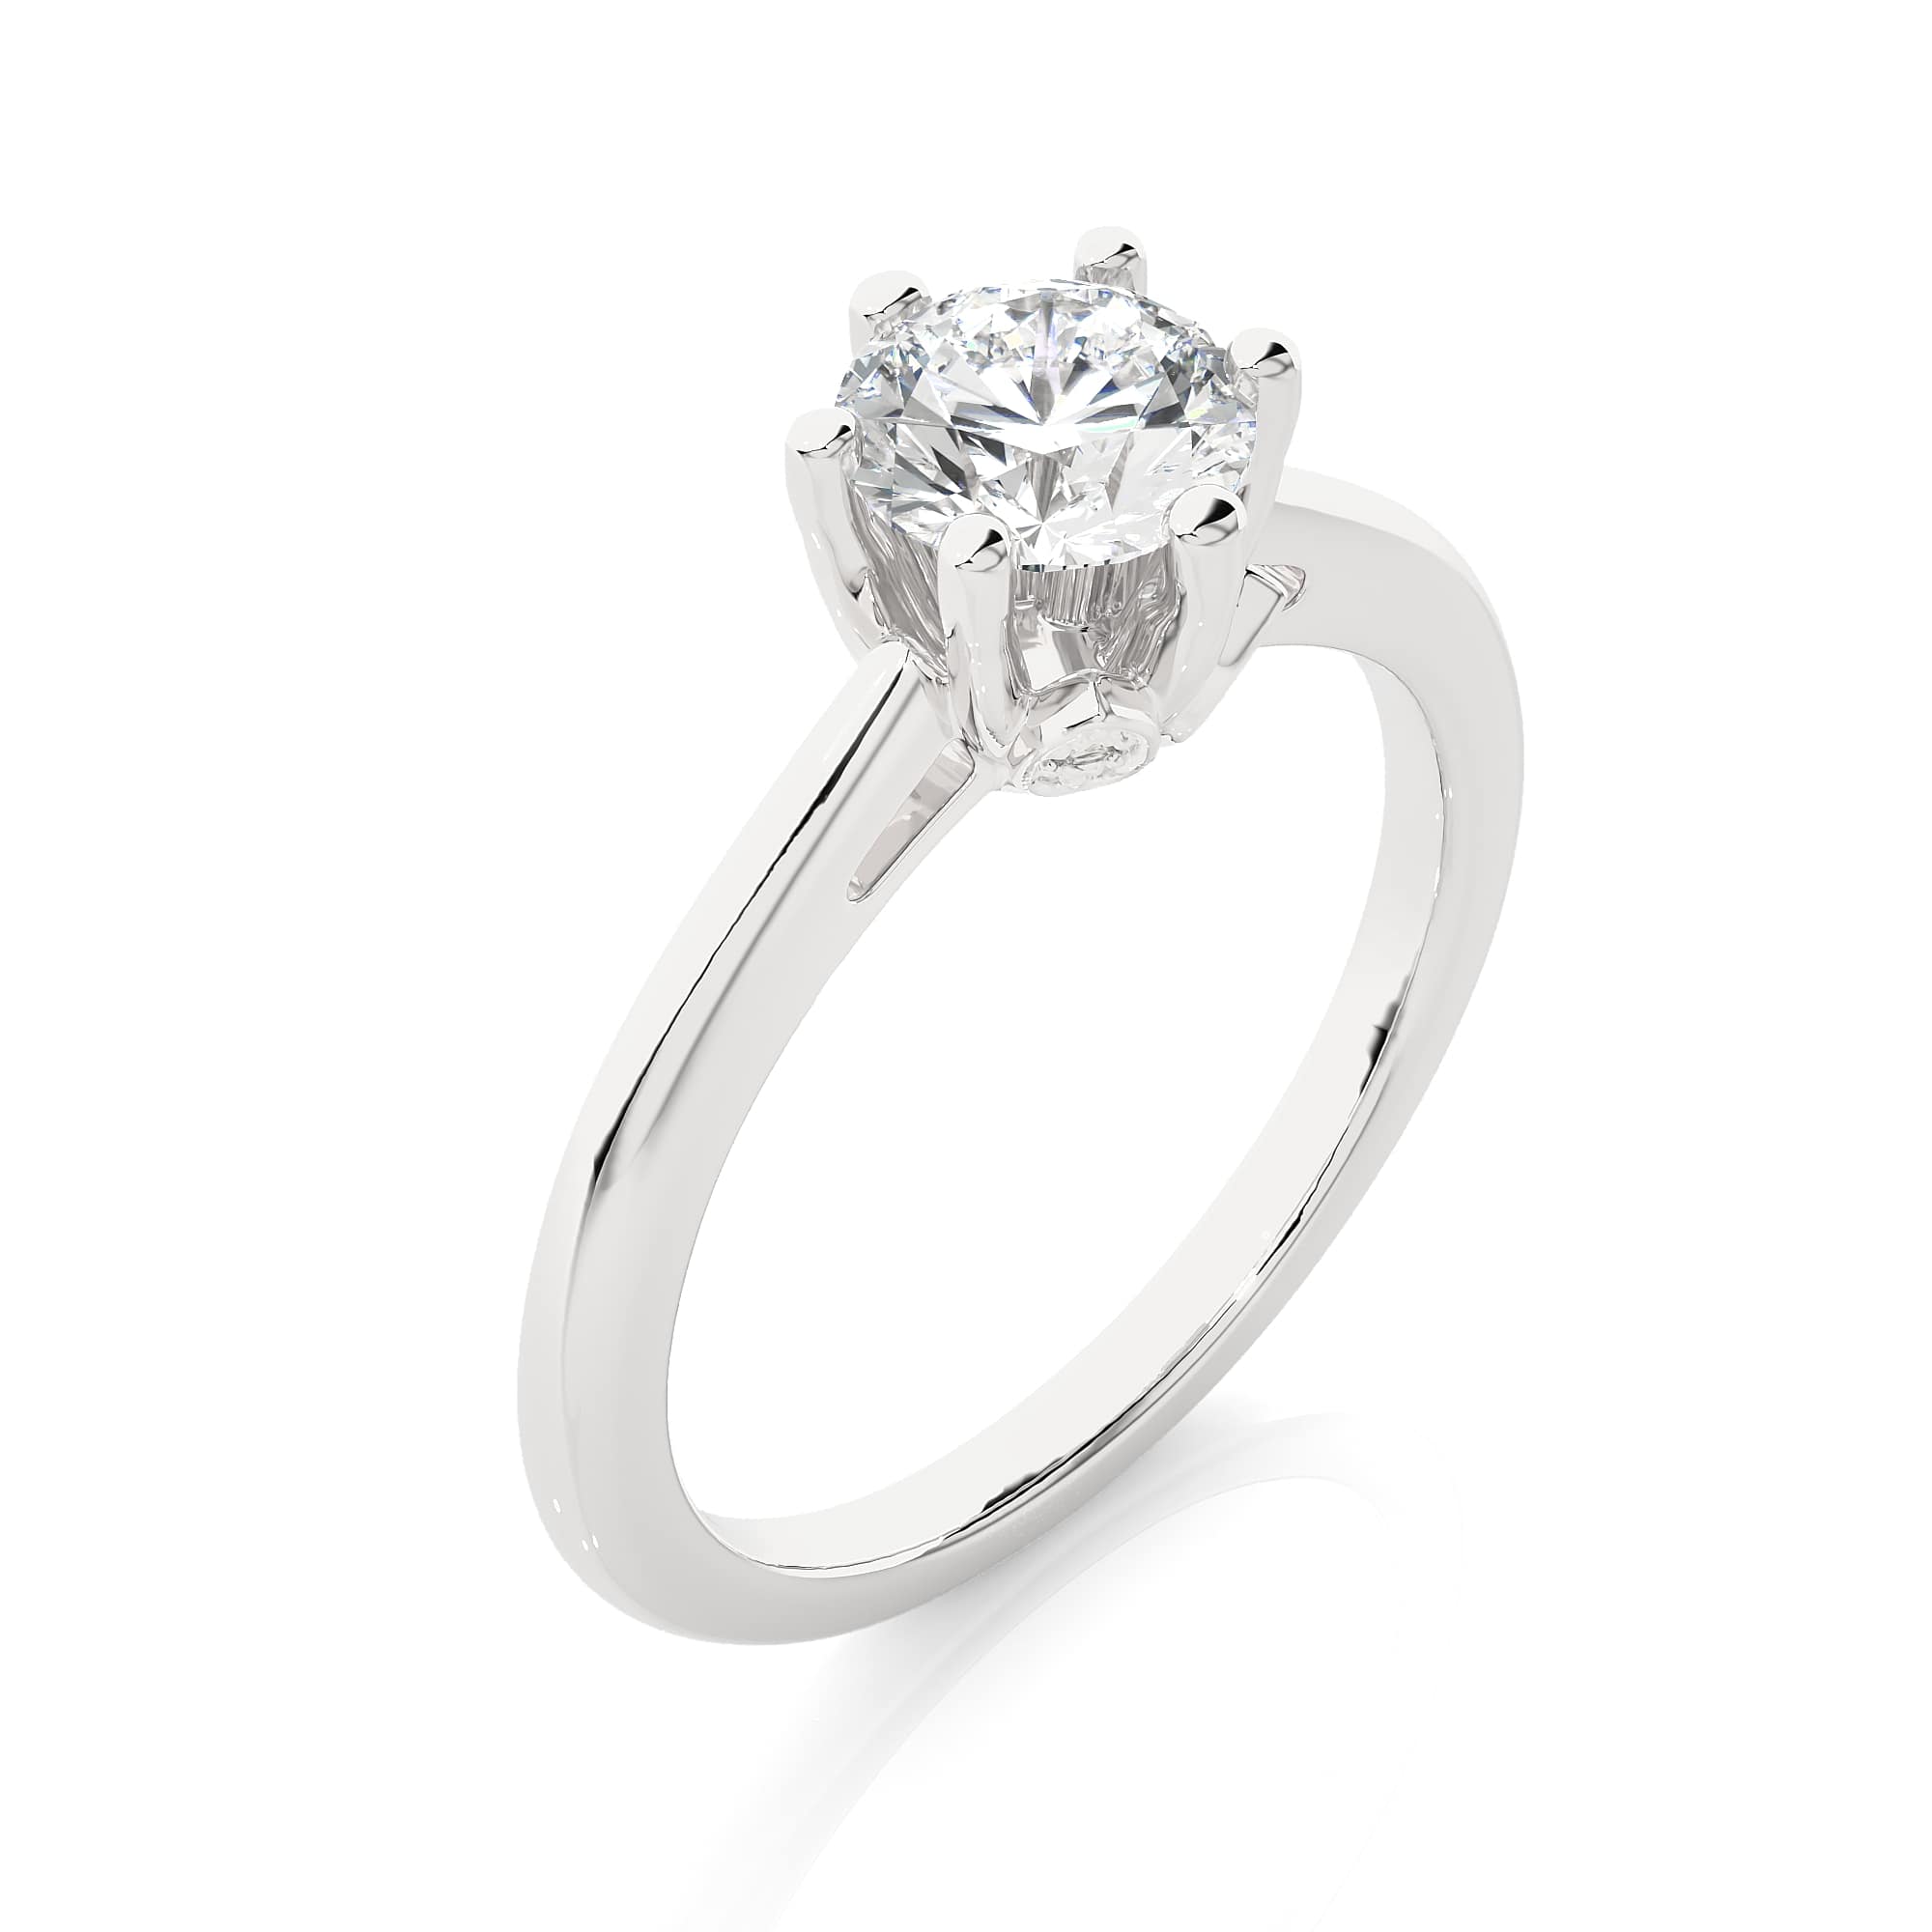 Solitaire Diamond Ring in White Gold